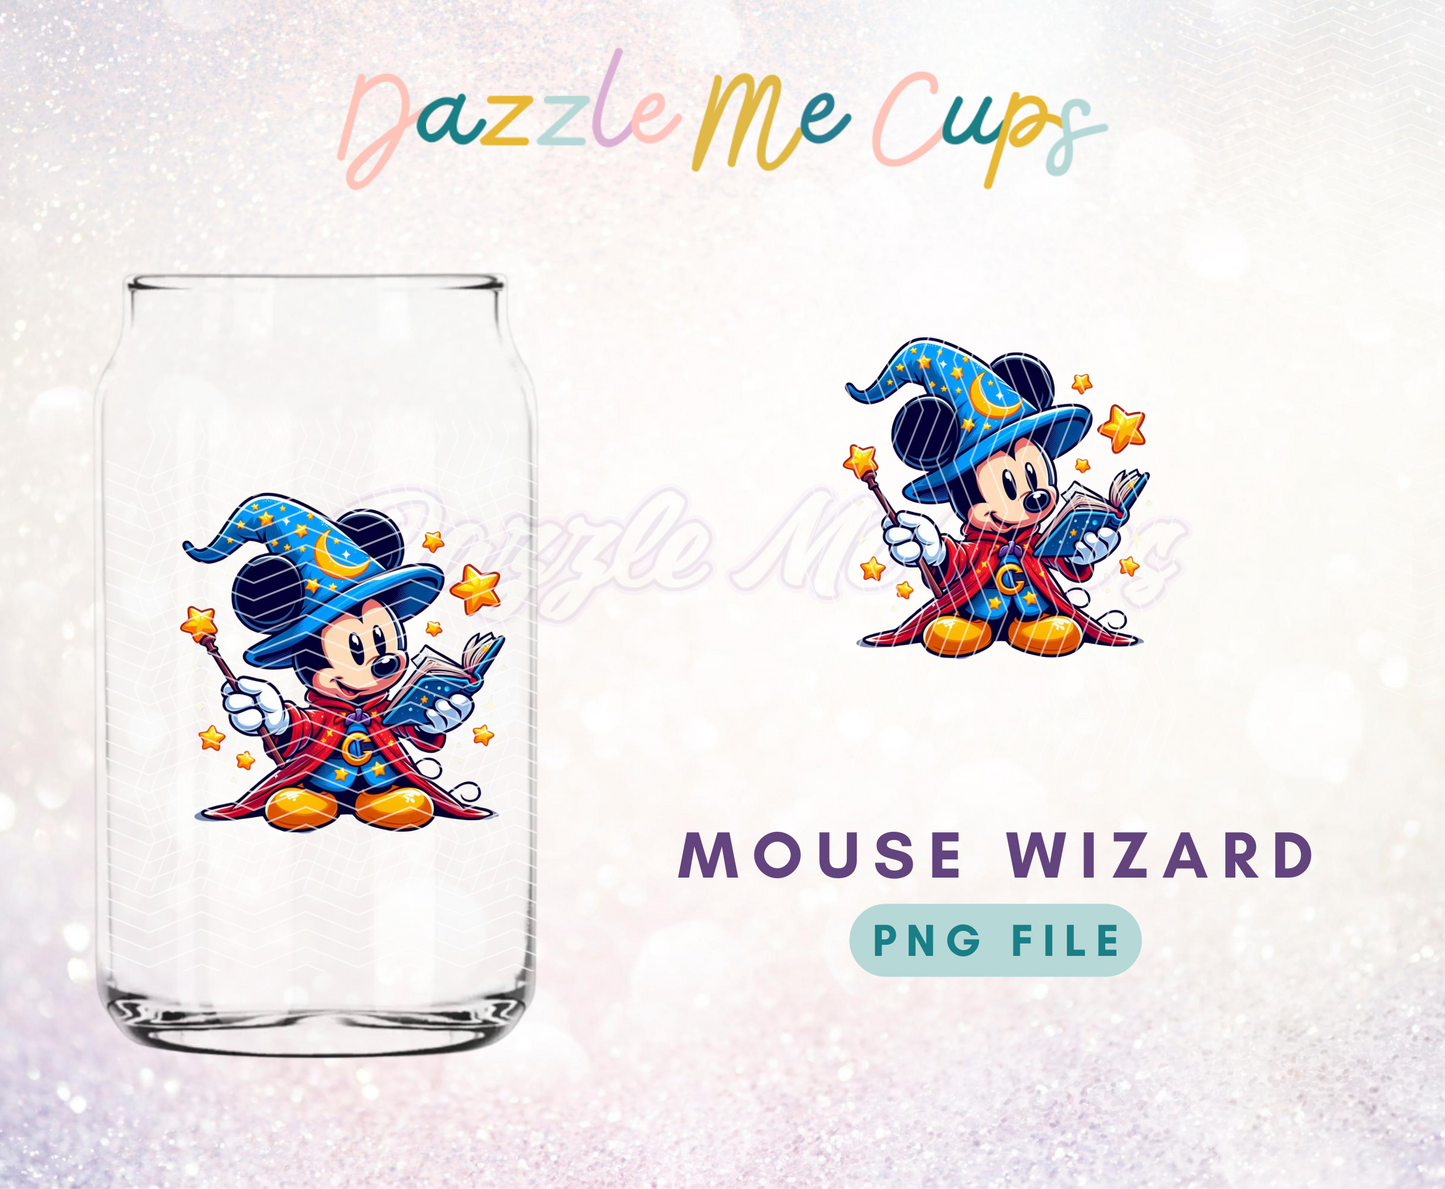 Mouse wizard PNG